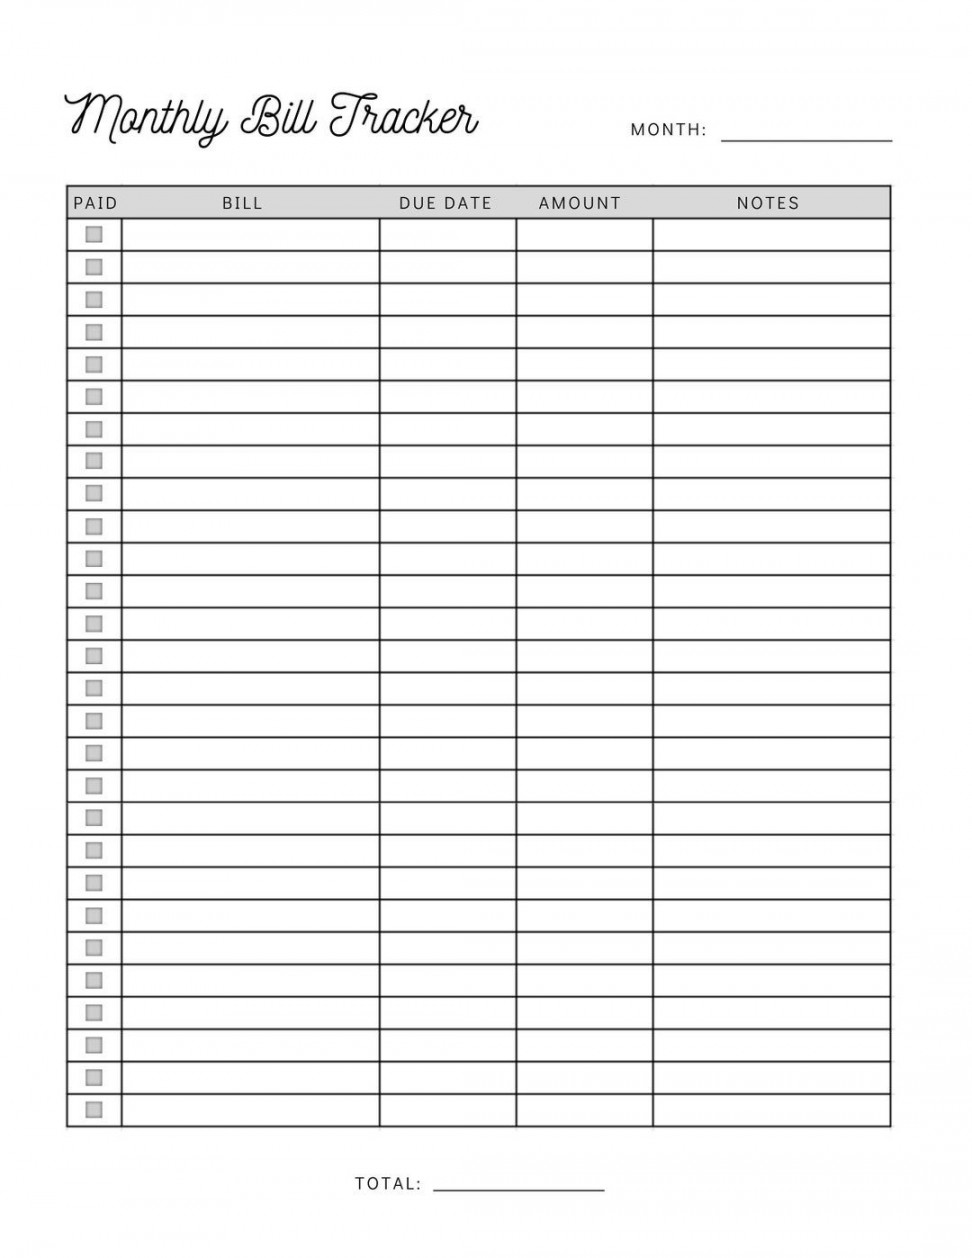 Monthly Bill Payment Tracker Printable Bill Pay Checklist - Etsy